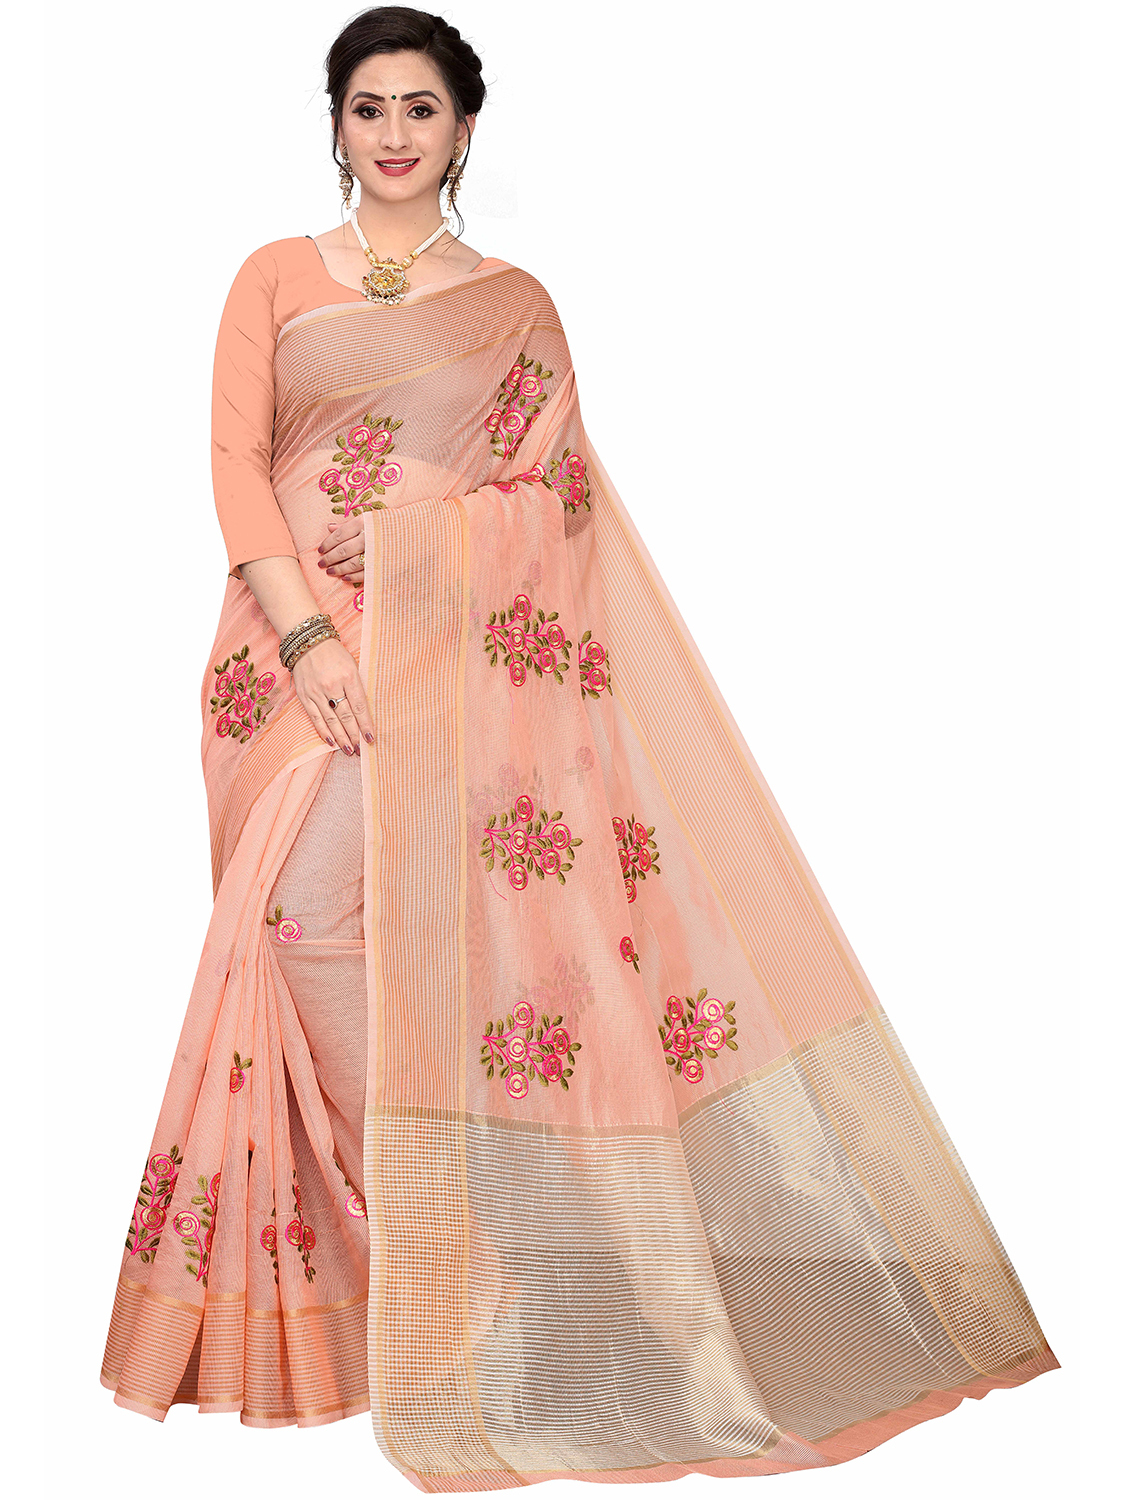 Floral Embroidery Saree